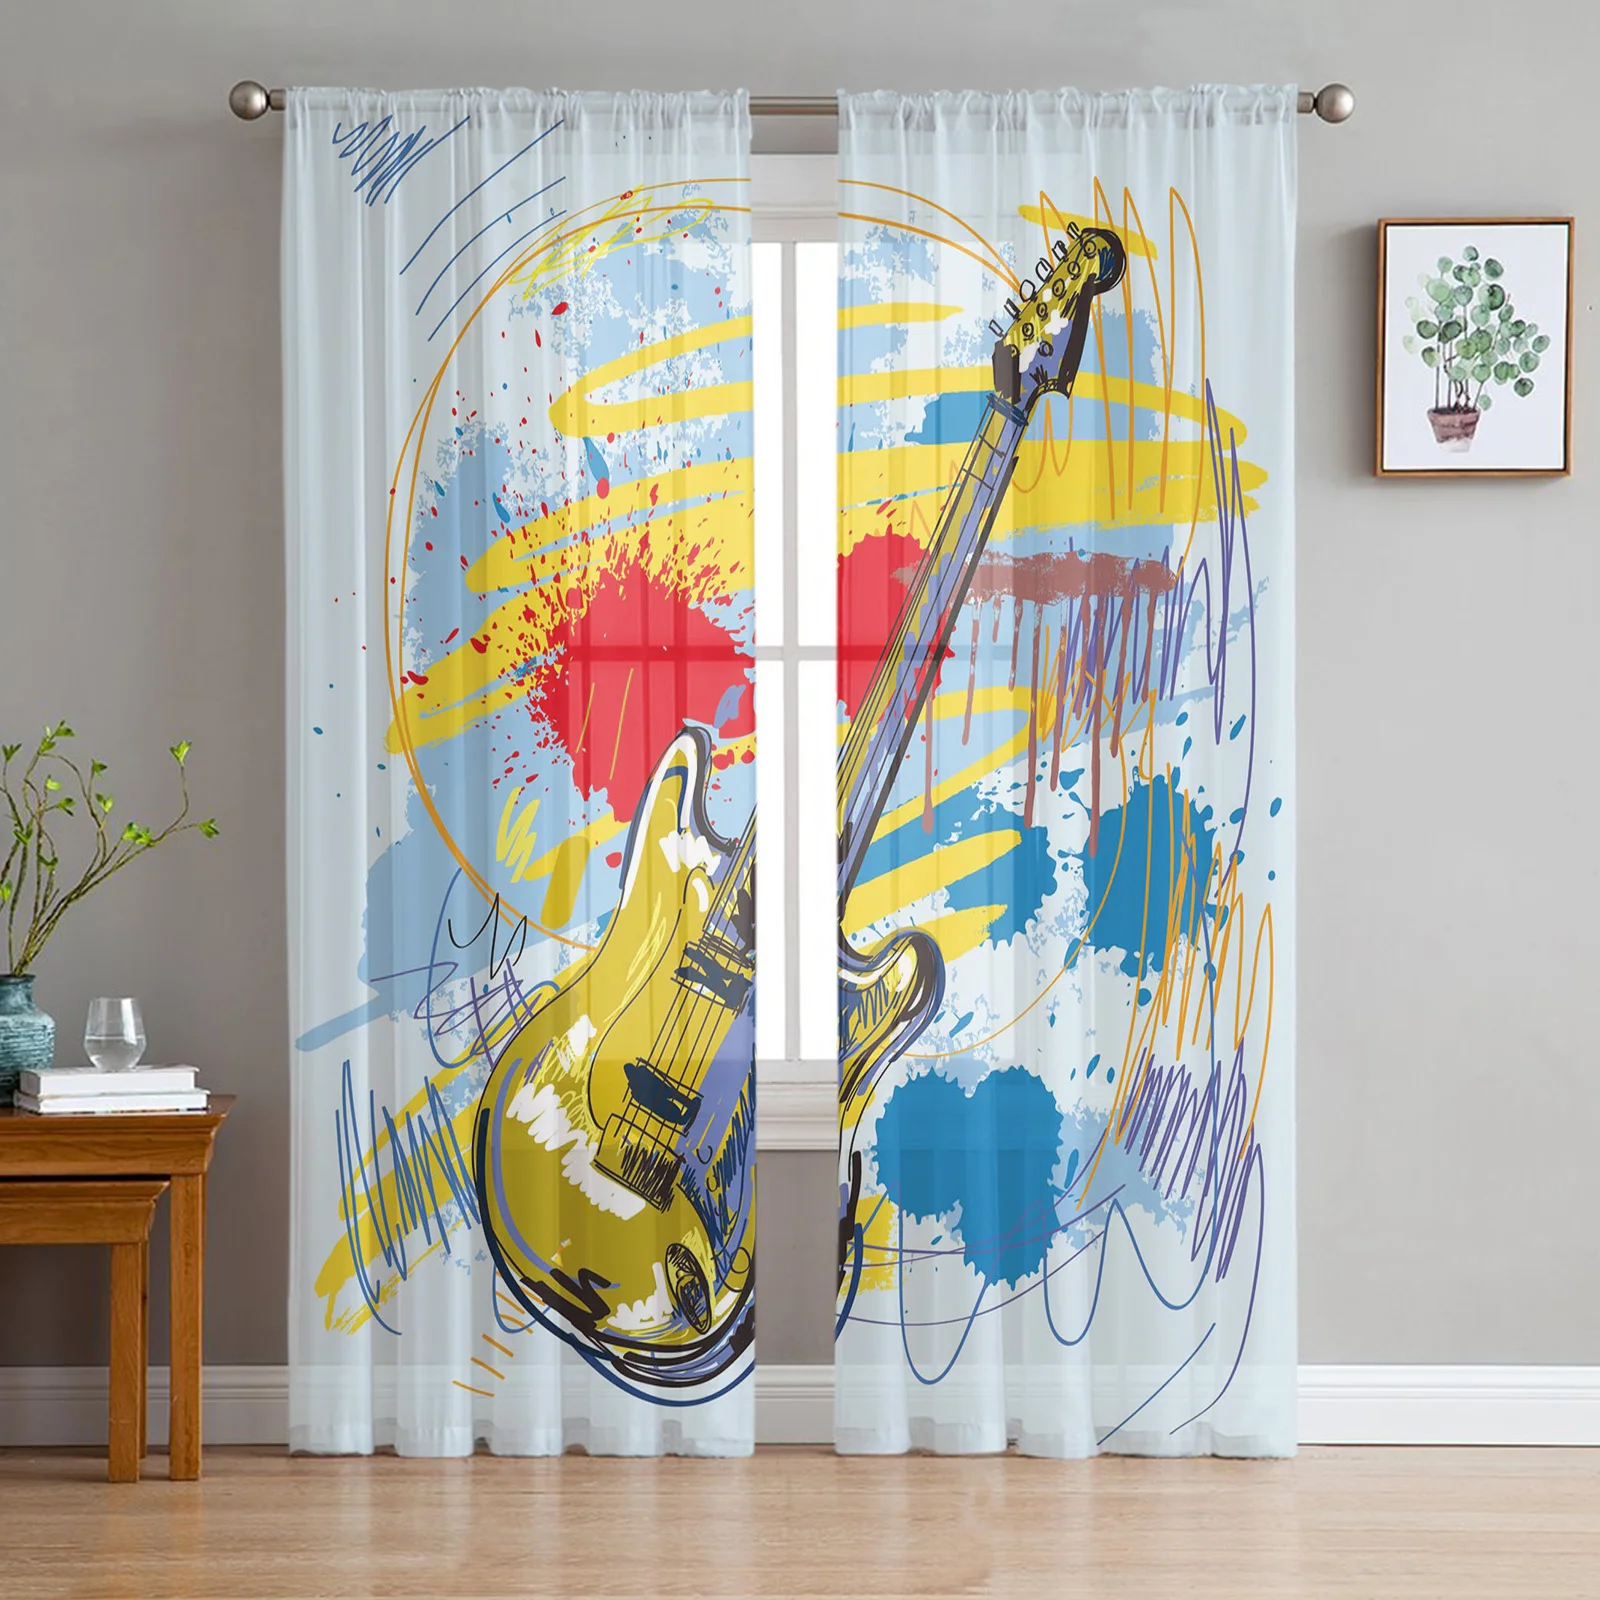 

Guitar Rock Music Color Bedroom Organza Voile Curtain Window Treatment Drapes Tulle Curtains for Living Room Sheer Curtains